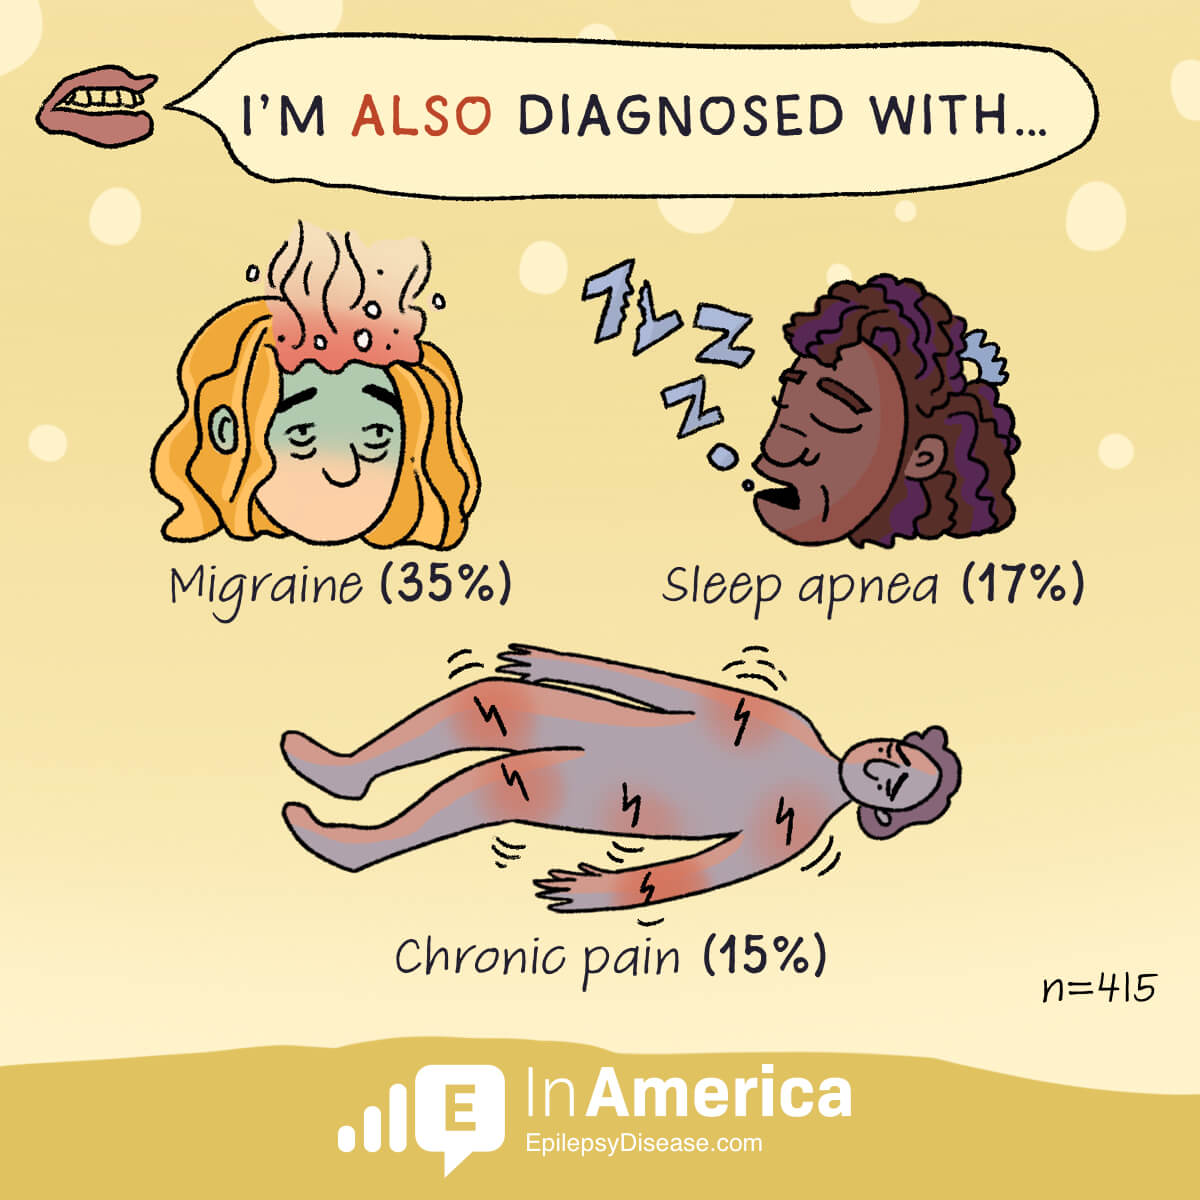 35% are diagnosed with migraine, 17% with sleep apnea, and 15% with chronic pain.